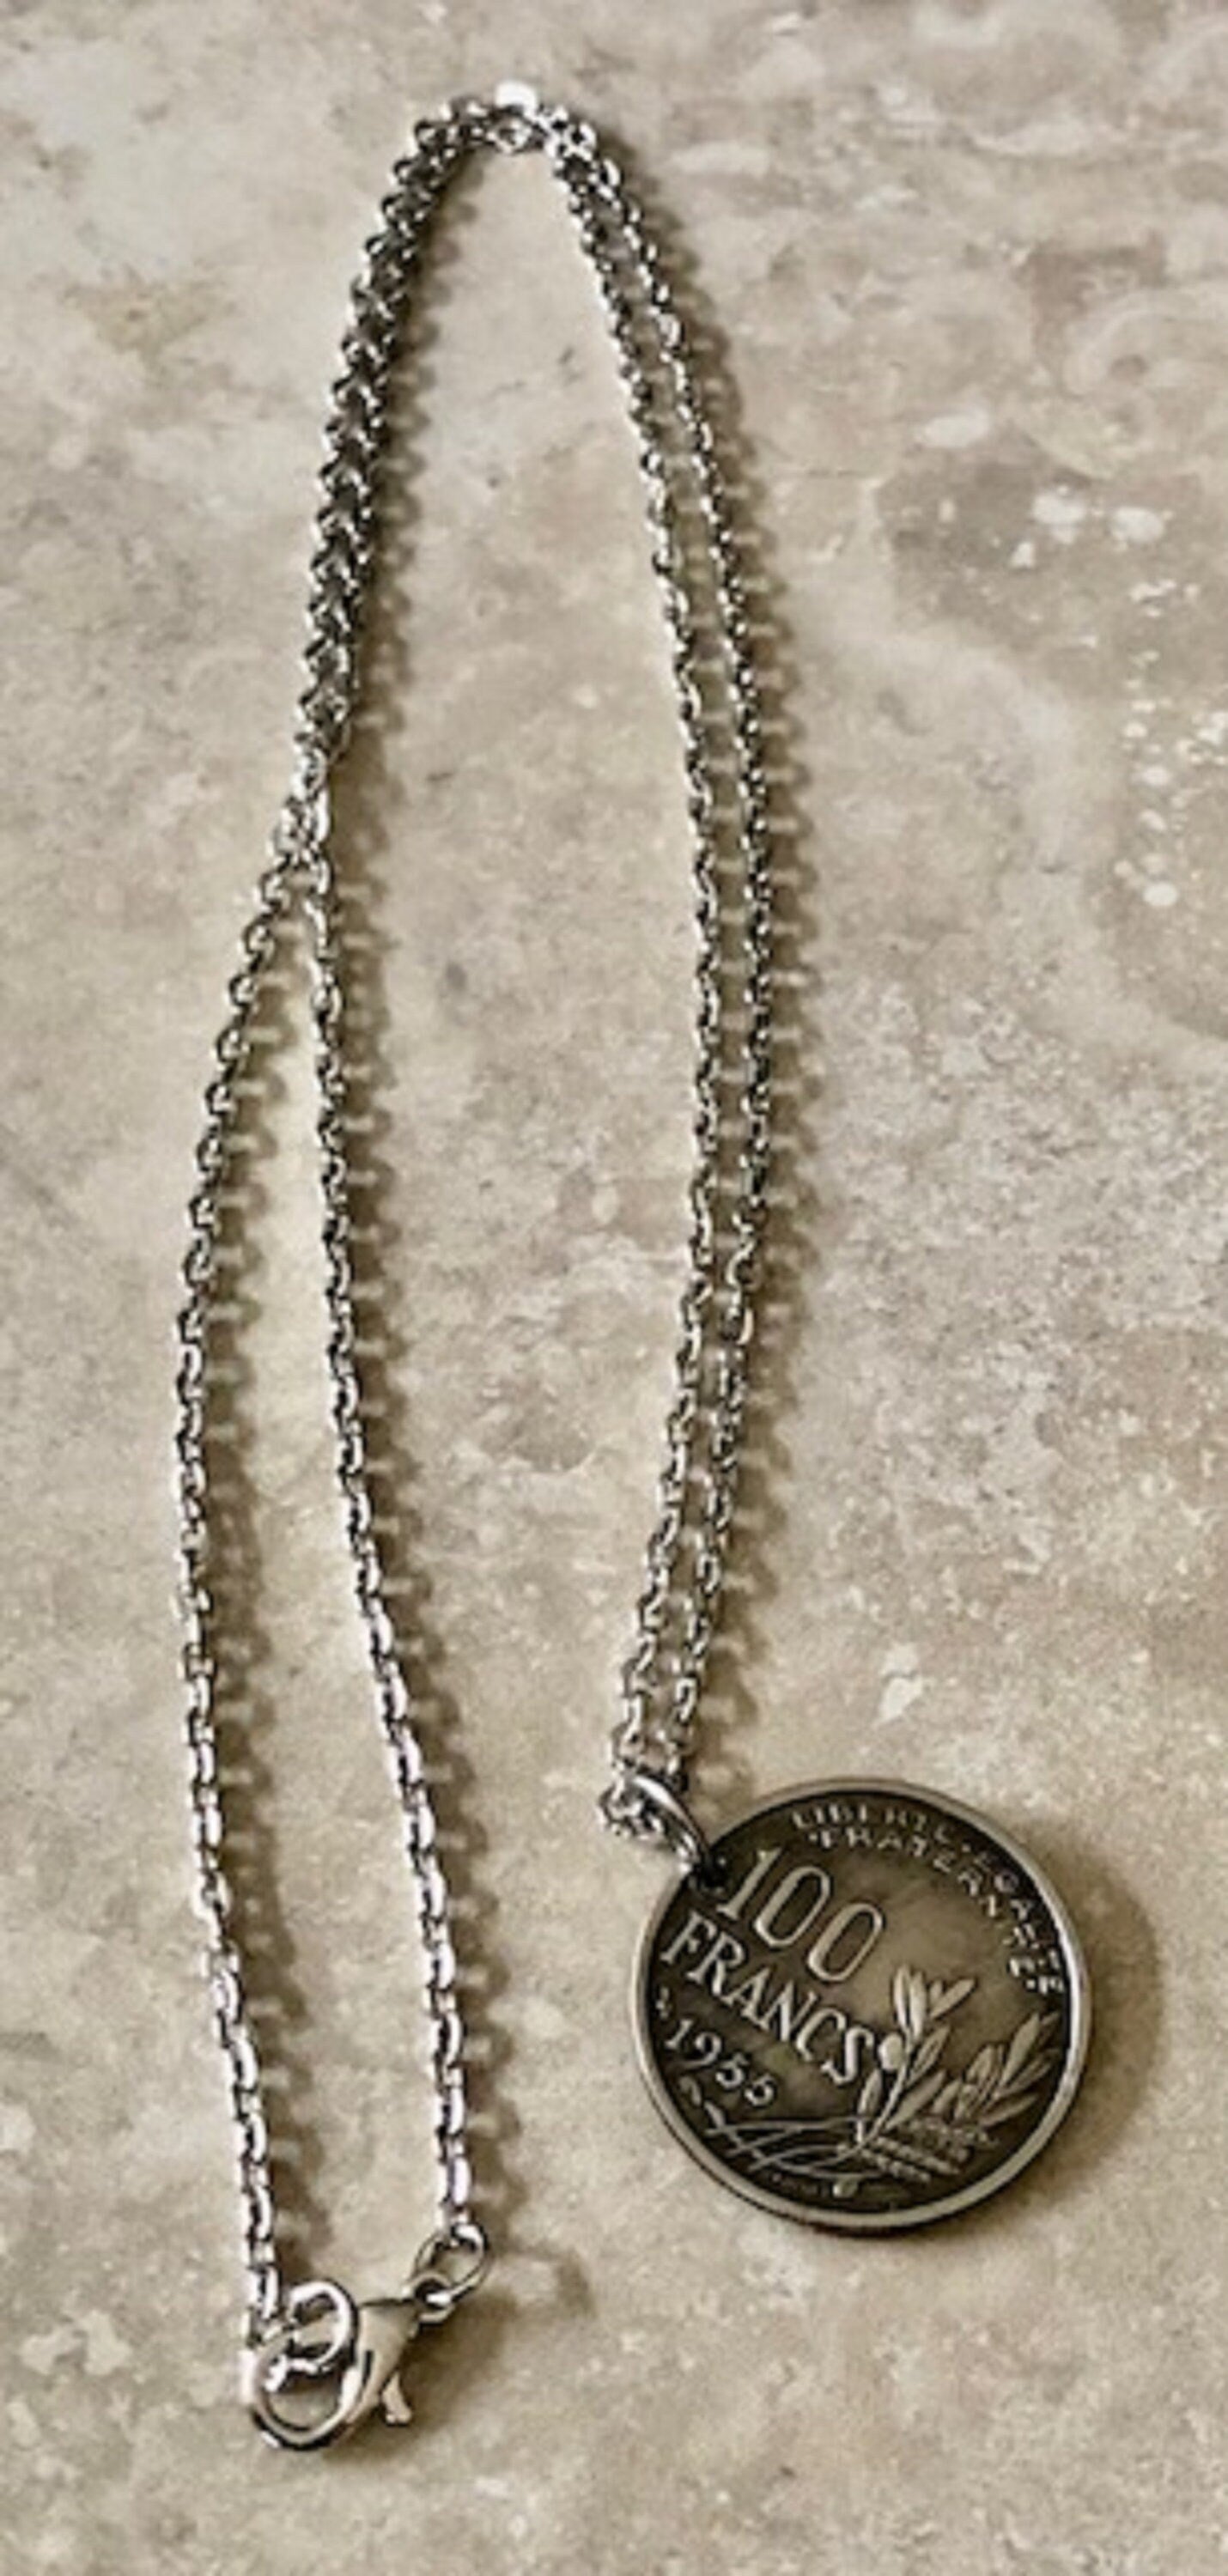 France Coin Pendant 100 Francs Coin Necklace Handmade Custom Made Charm Gift For Friend Coin Charm Gift For Him, Coin Collector, World Coins